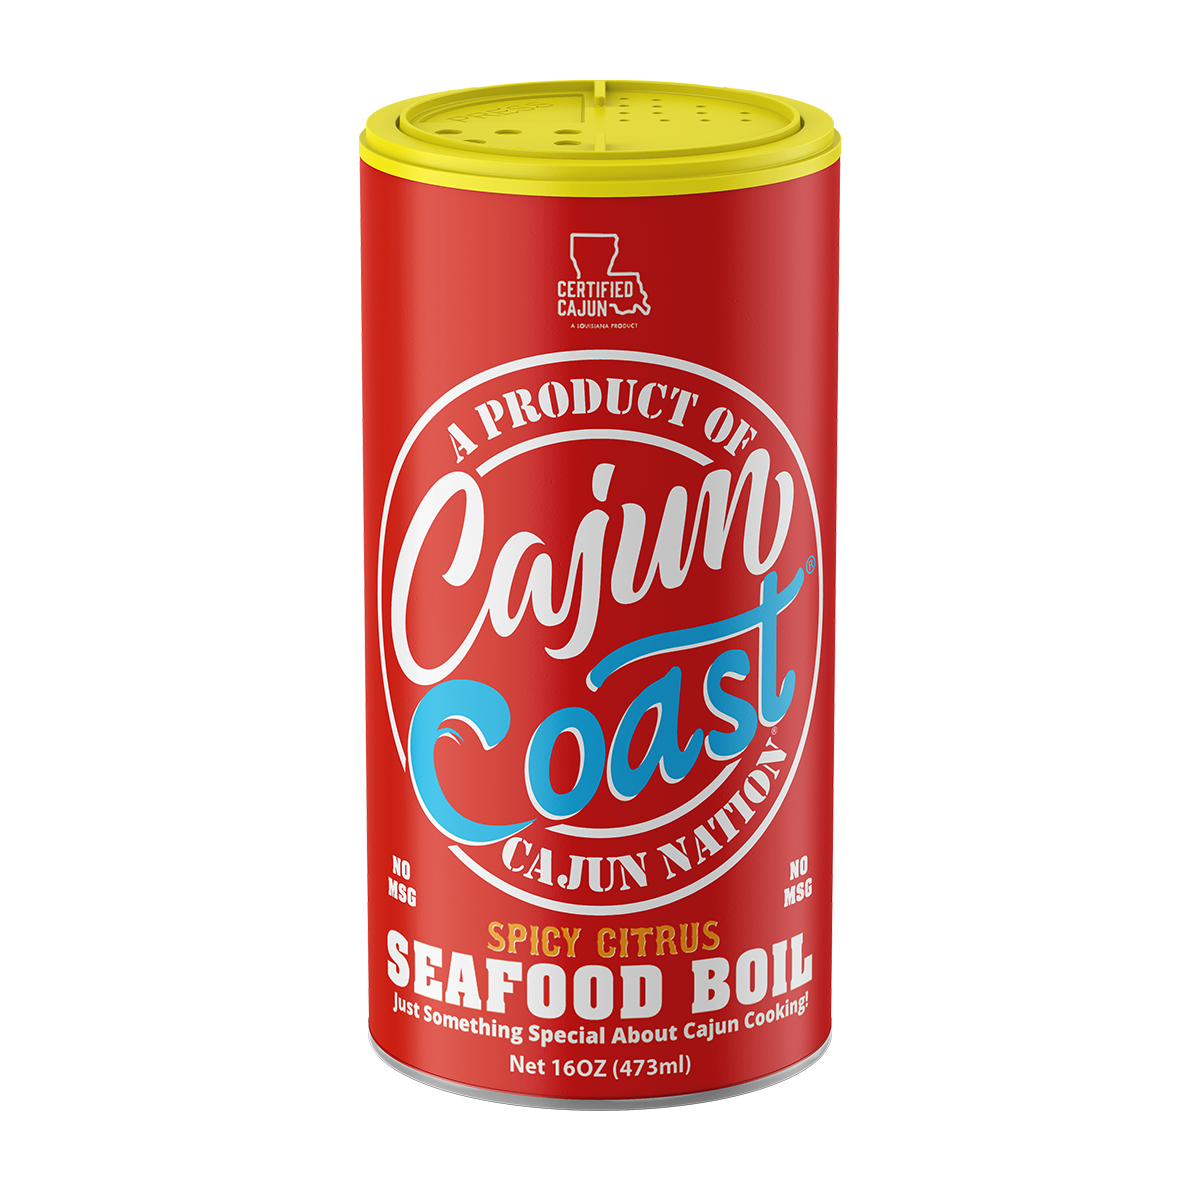  Cajun Coast Spicy Citrus Seafood Boil with NO MSG and Gluten Free is a Certified Cajun 16 oz flavorful spicy citrus seasoning blend of Cajun Spices that contains 310mg of Sodium blended for the Home Chef.